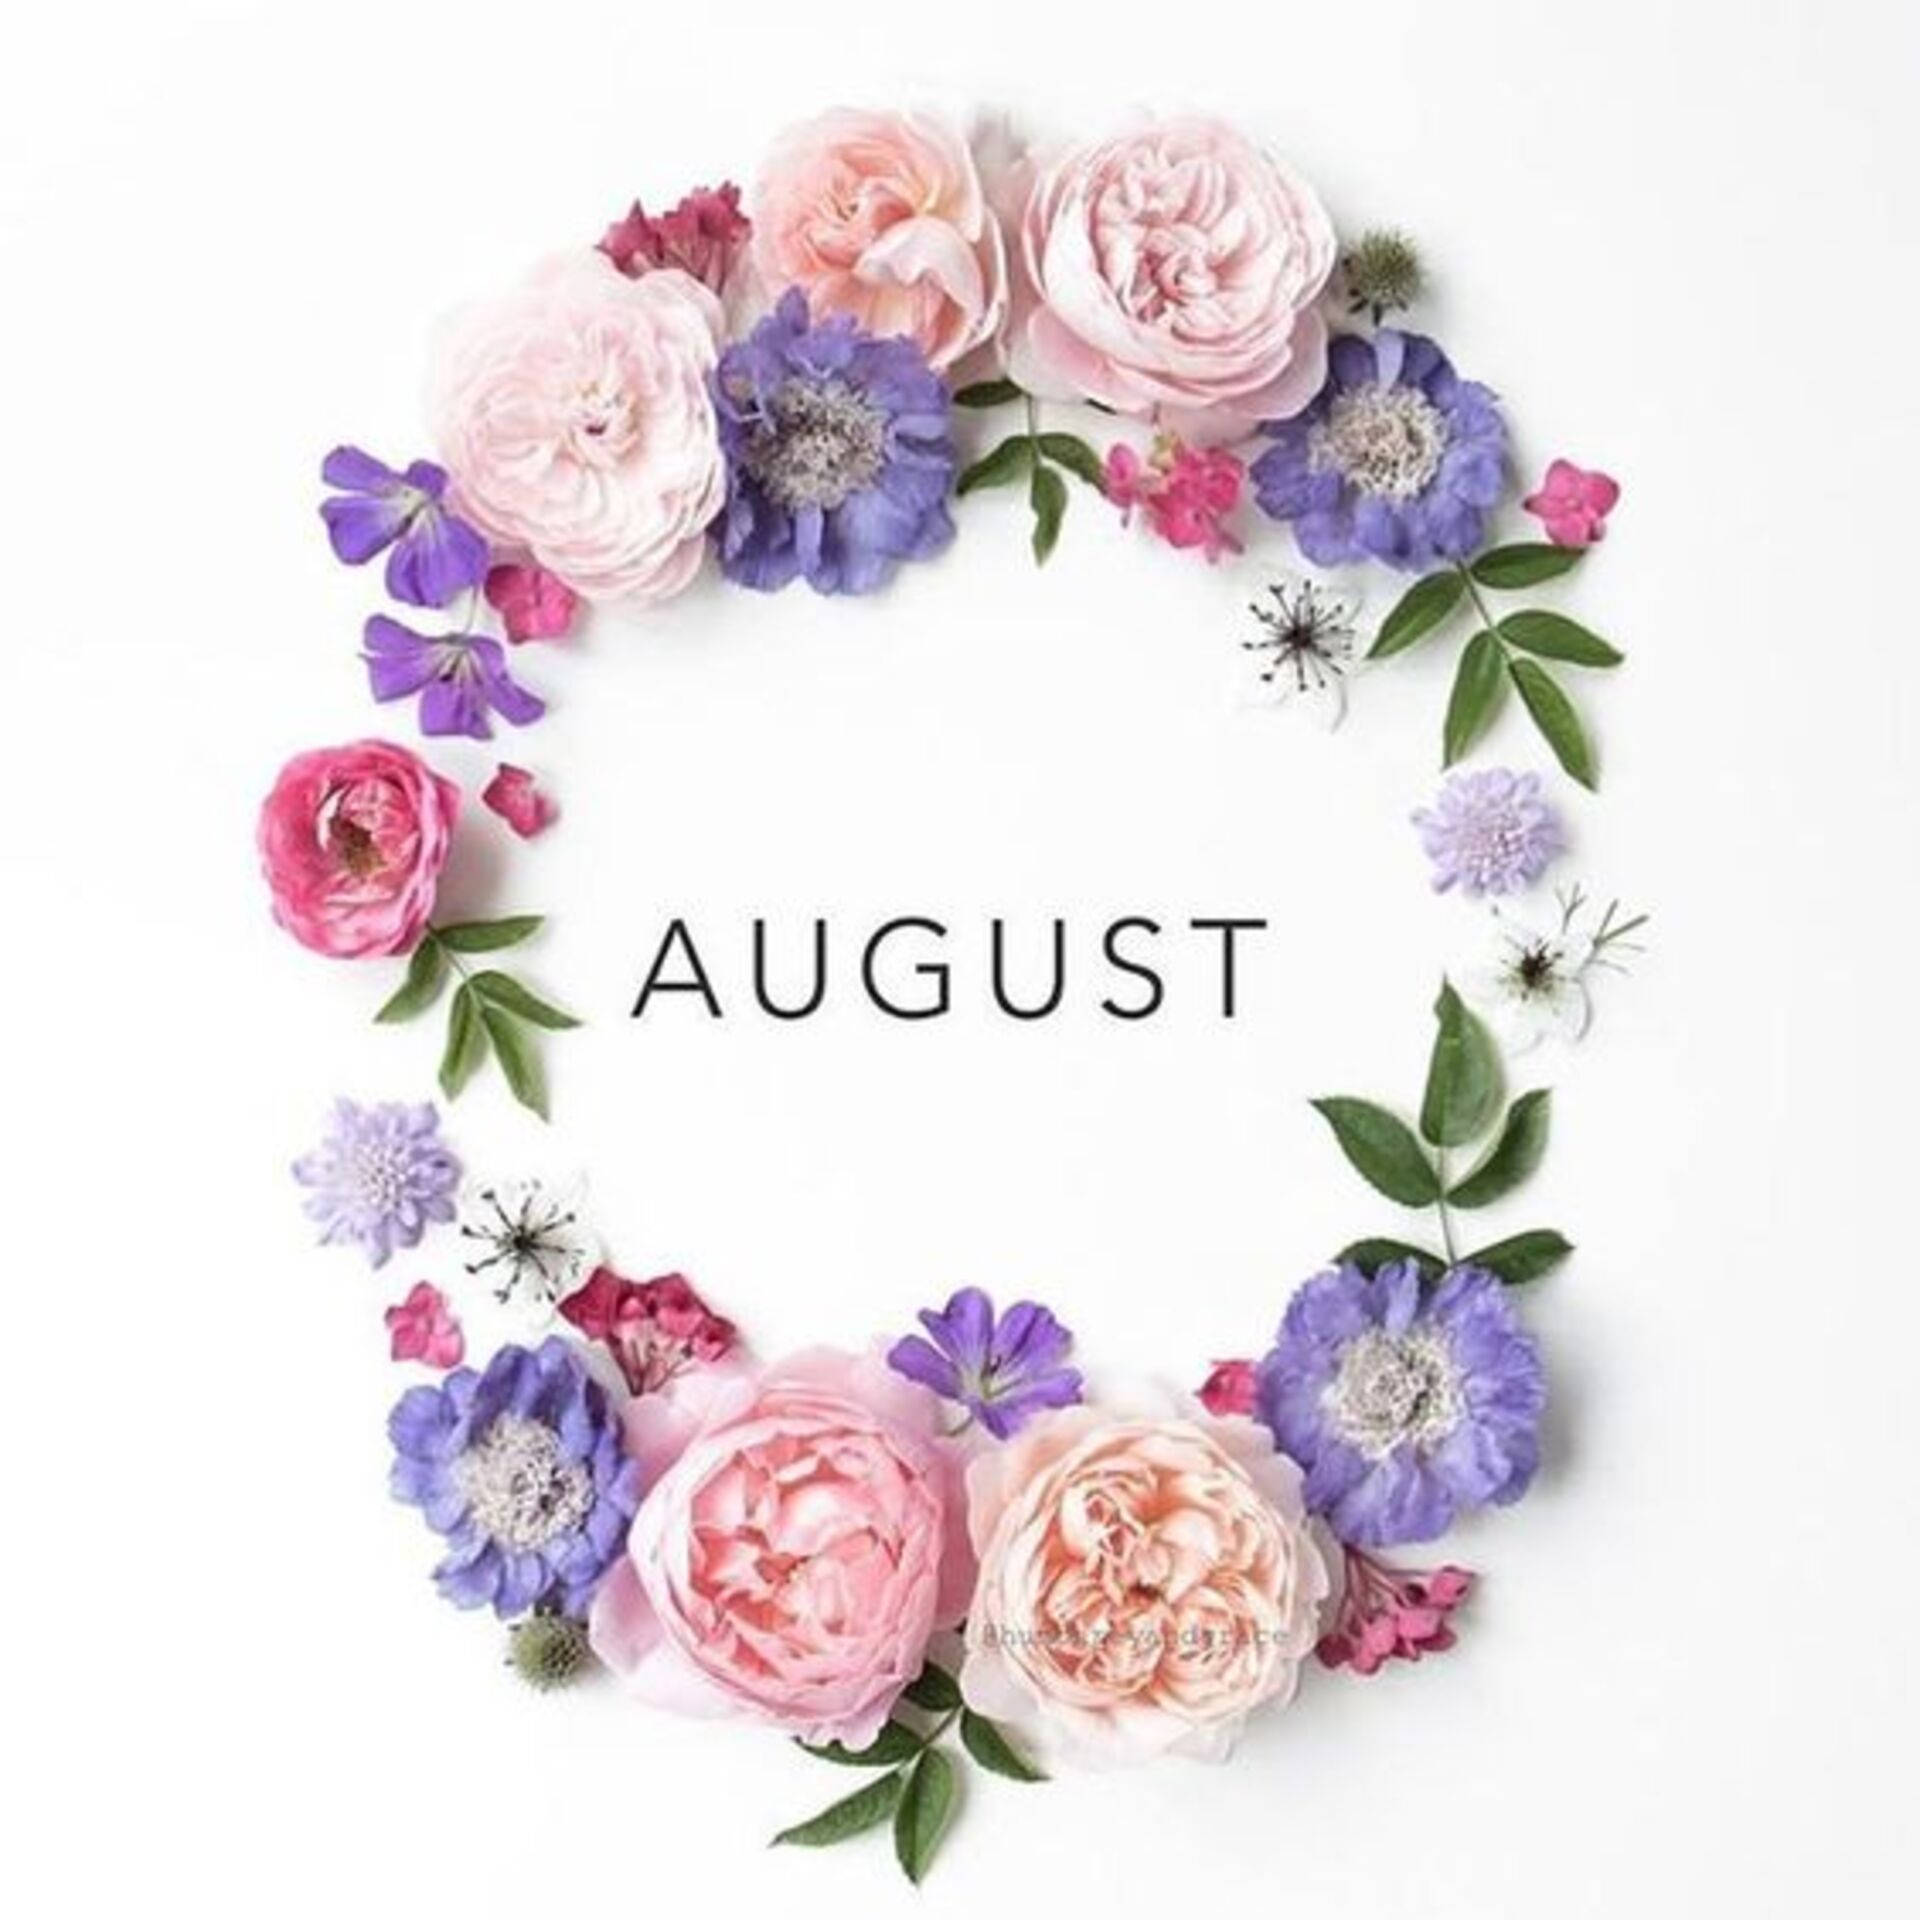 A beautiful flower wreath to welcome August Wallpaper